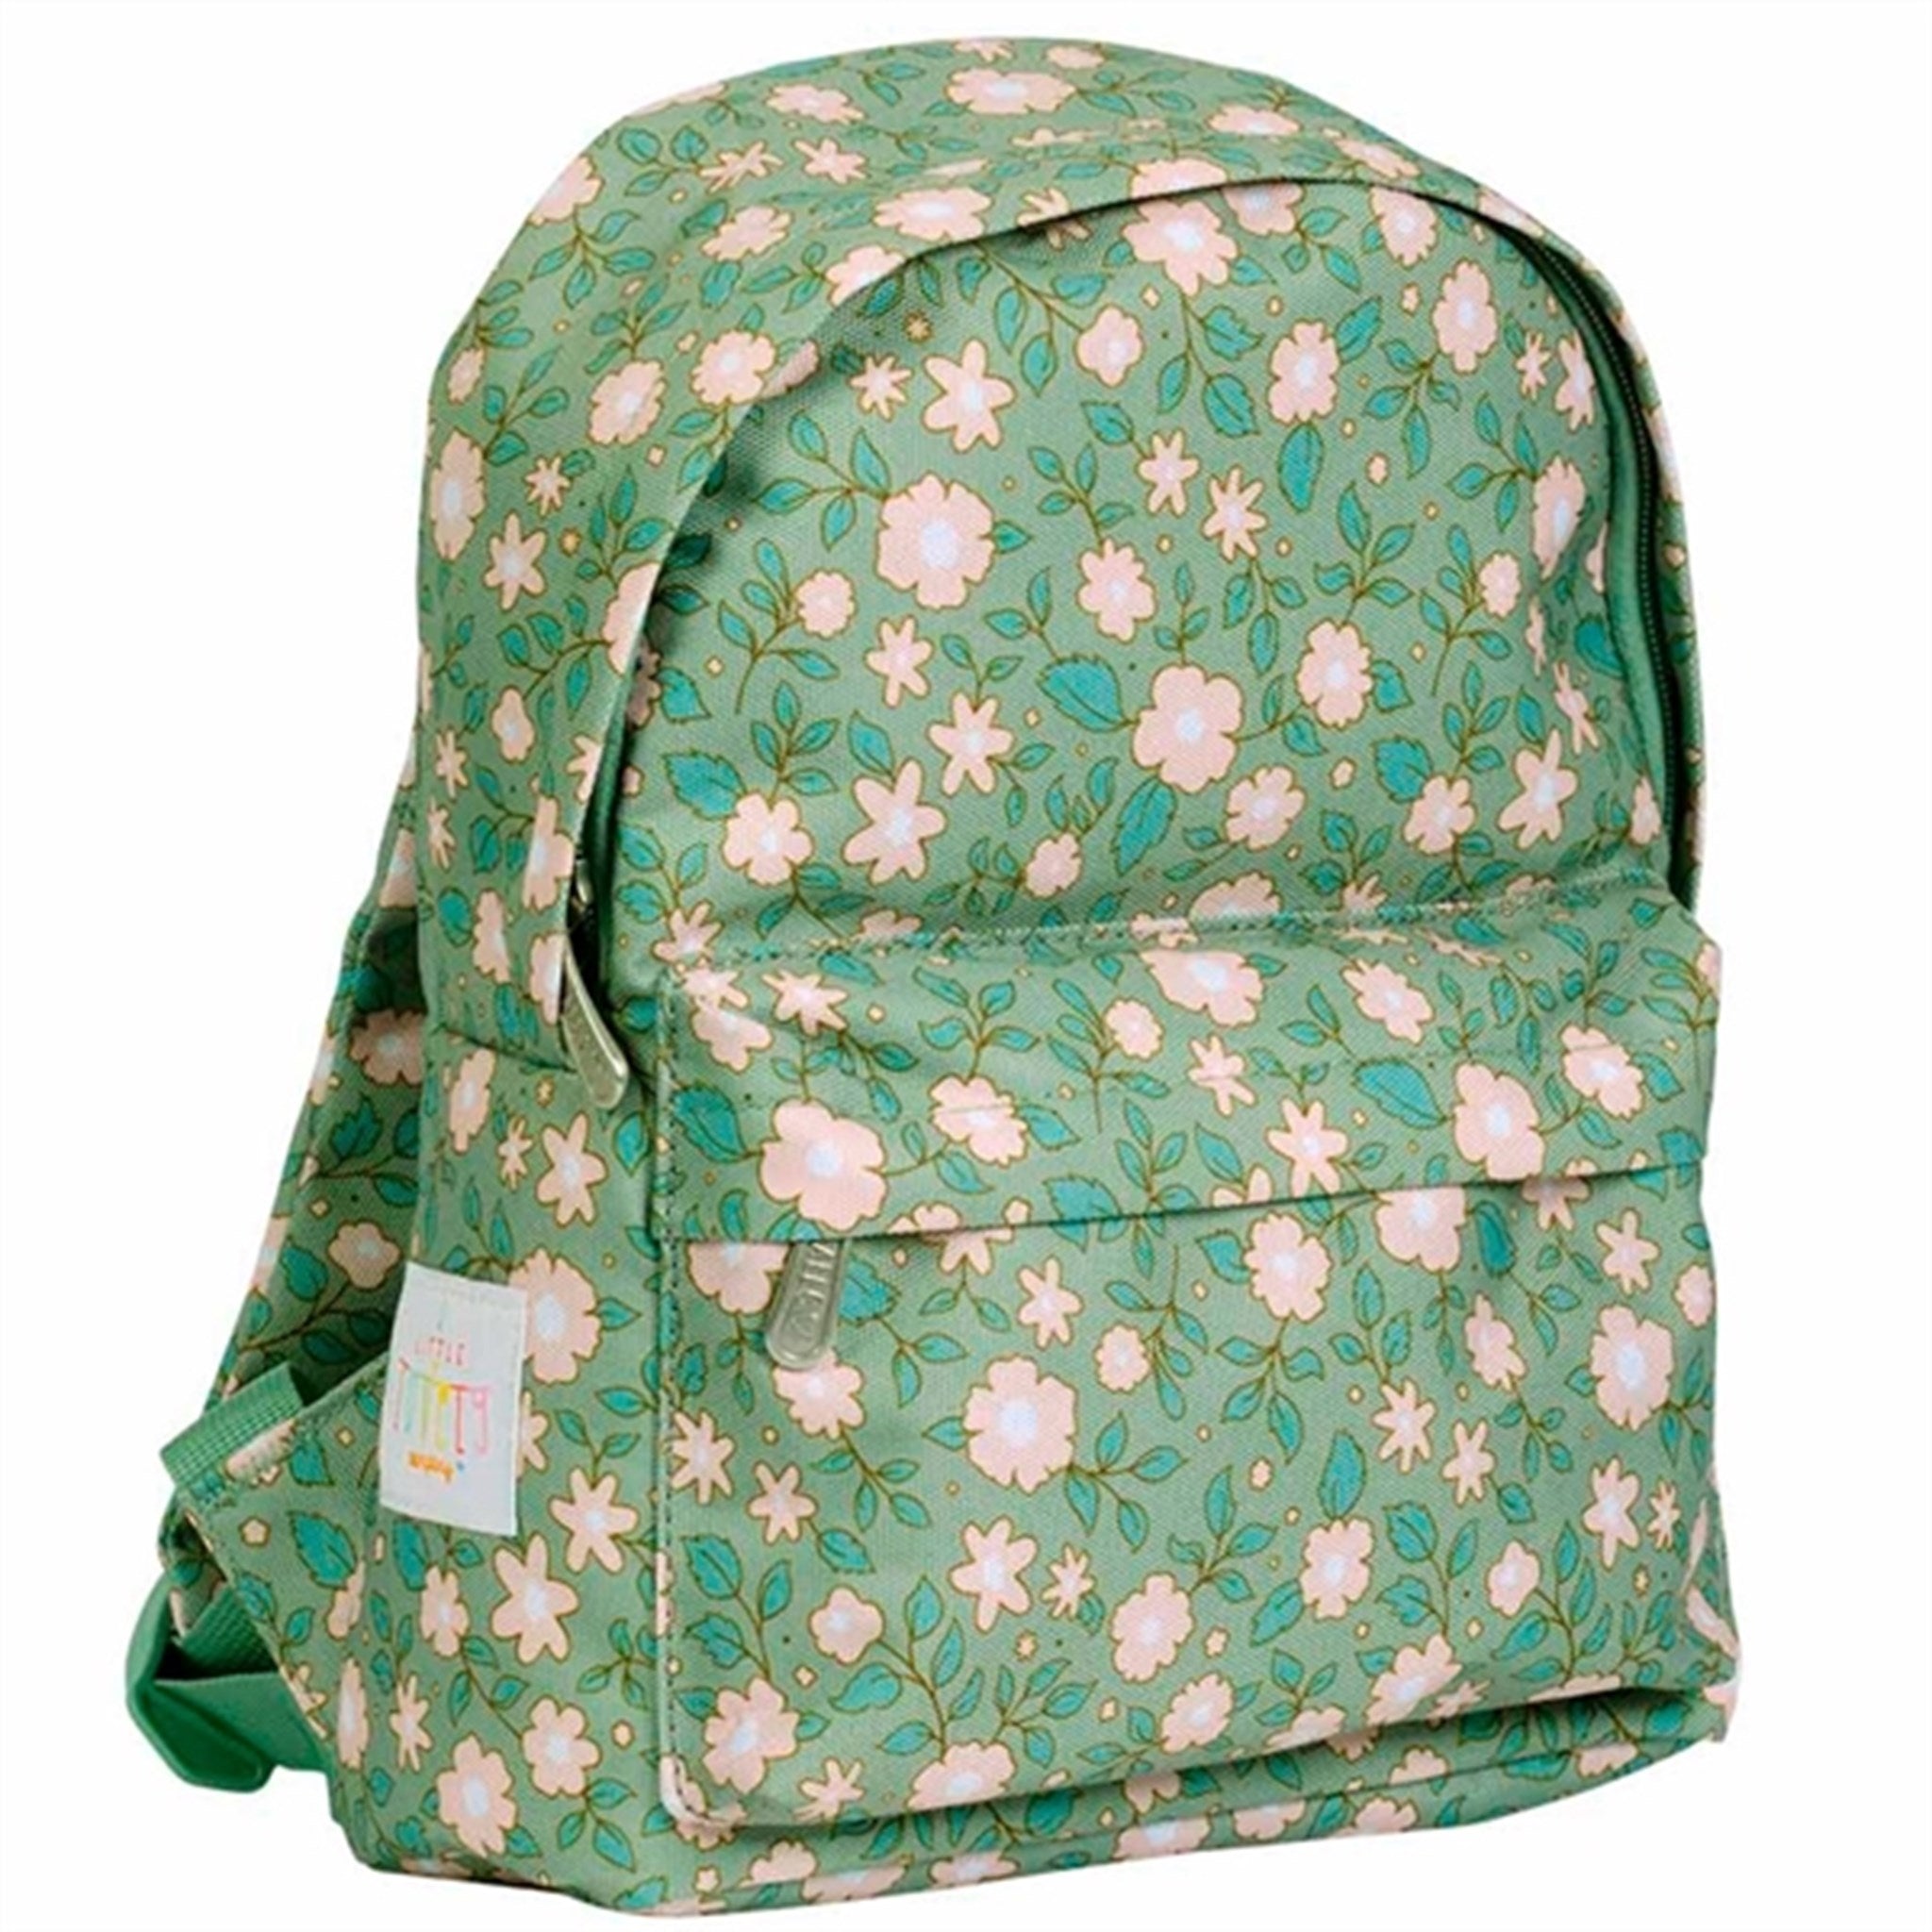 A Little Lovely Company Backpack Small Blossom Sage 2